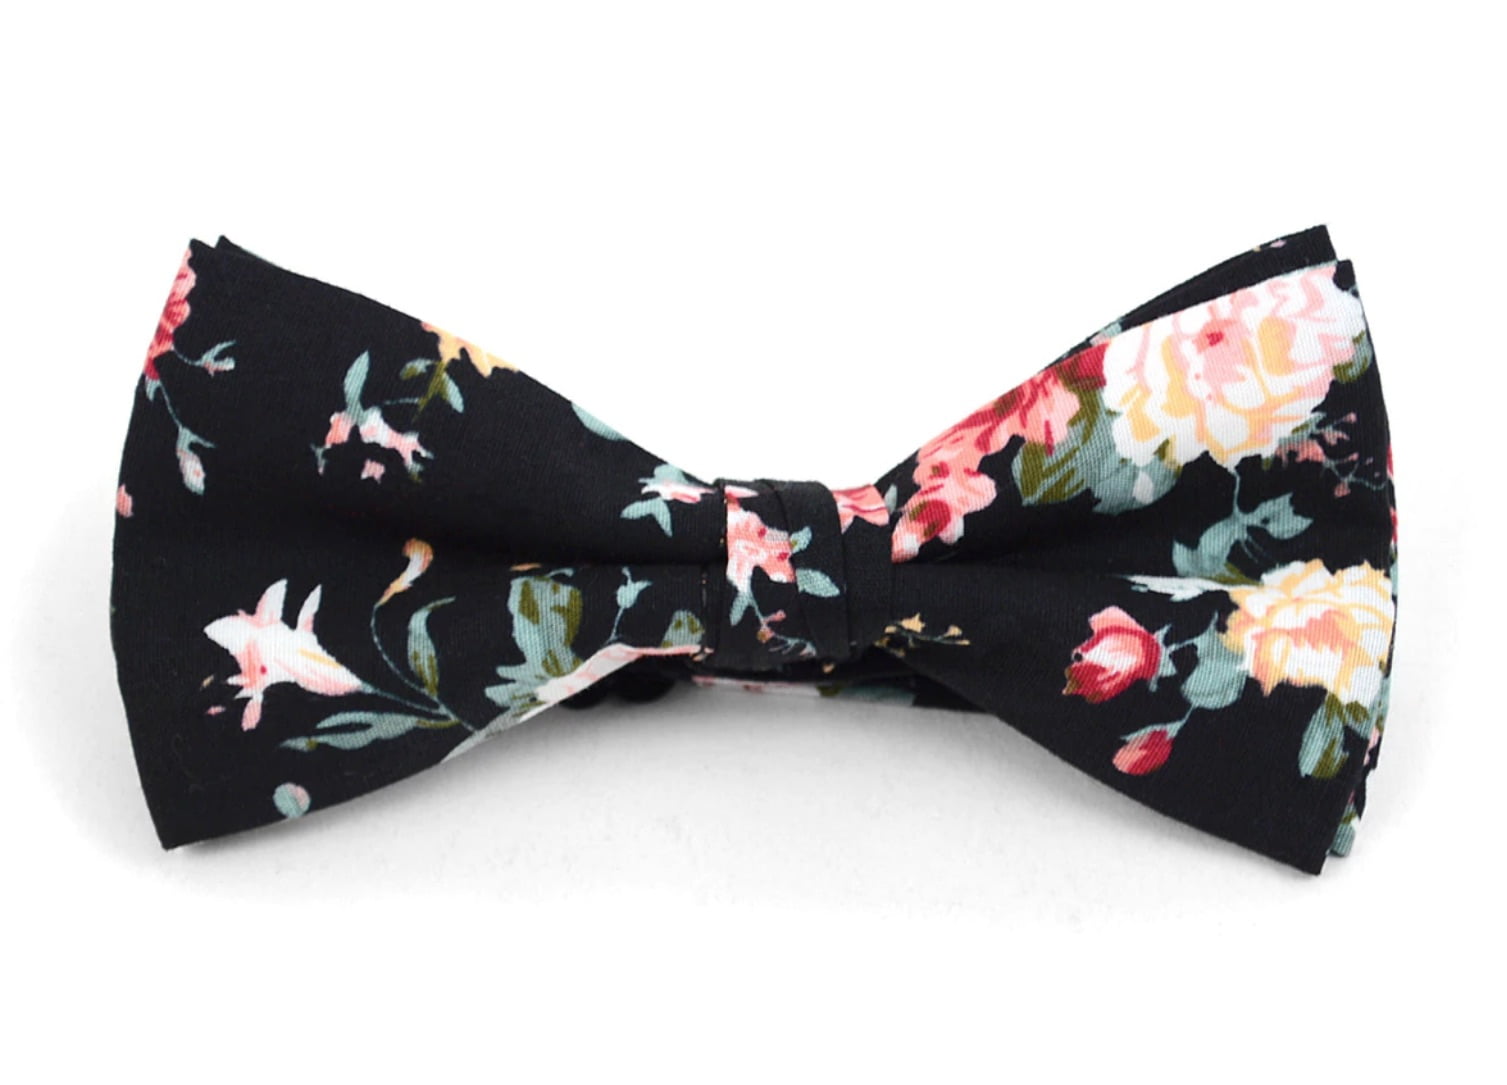 Urban-Peacock Men's Cotton Banded Bow Tie with Gift Box - Floral ...